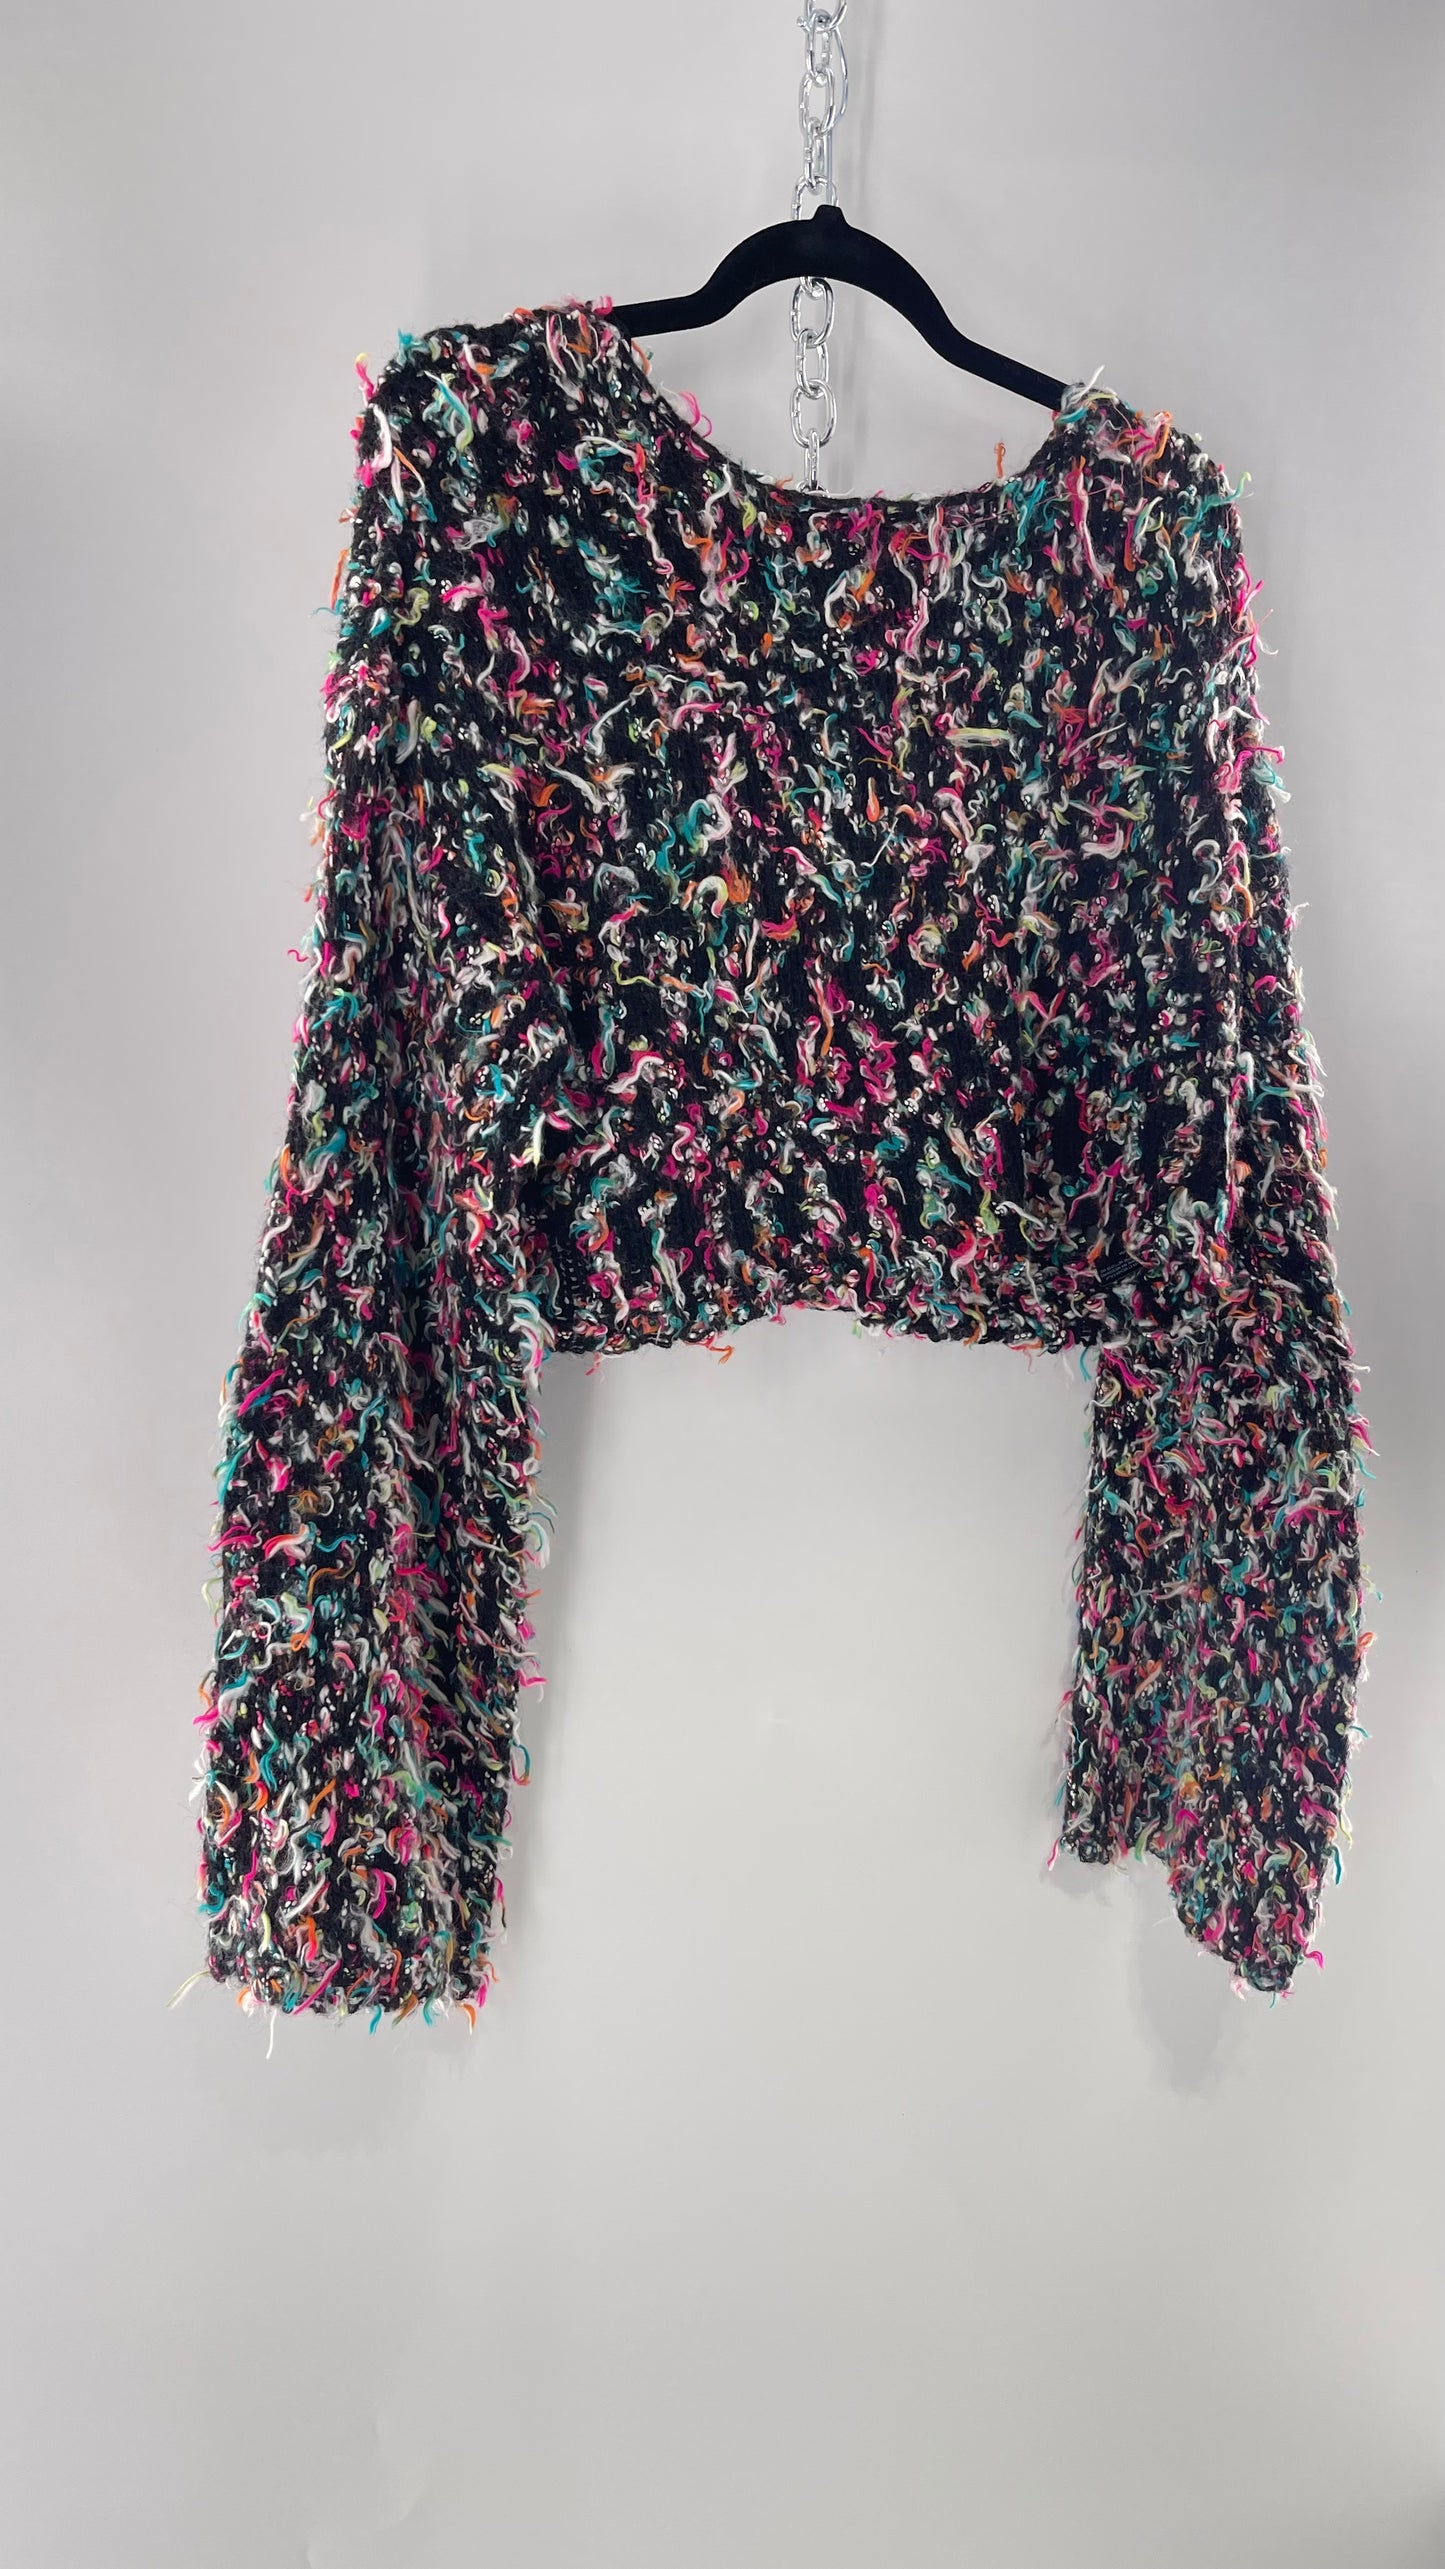 Urban Outfitters Shaggy Black Cropped Sweater with Colorful Threads (Medium)